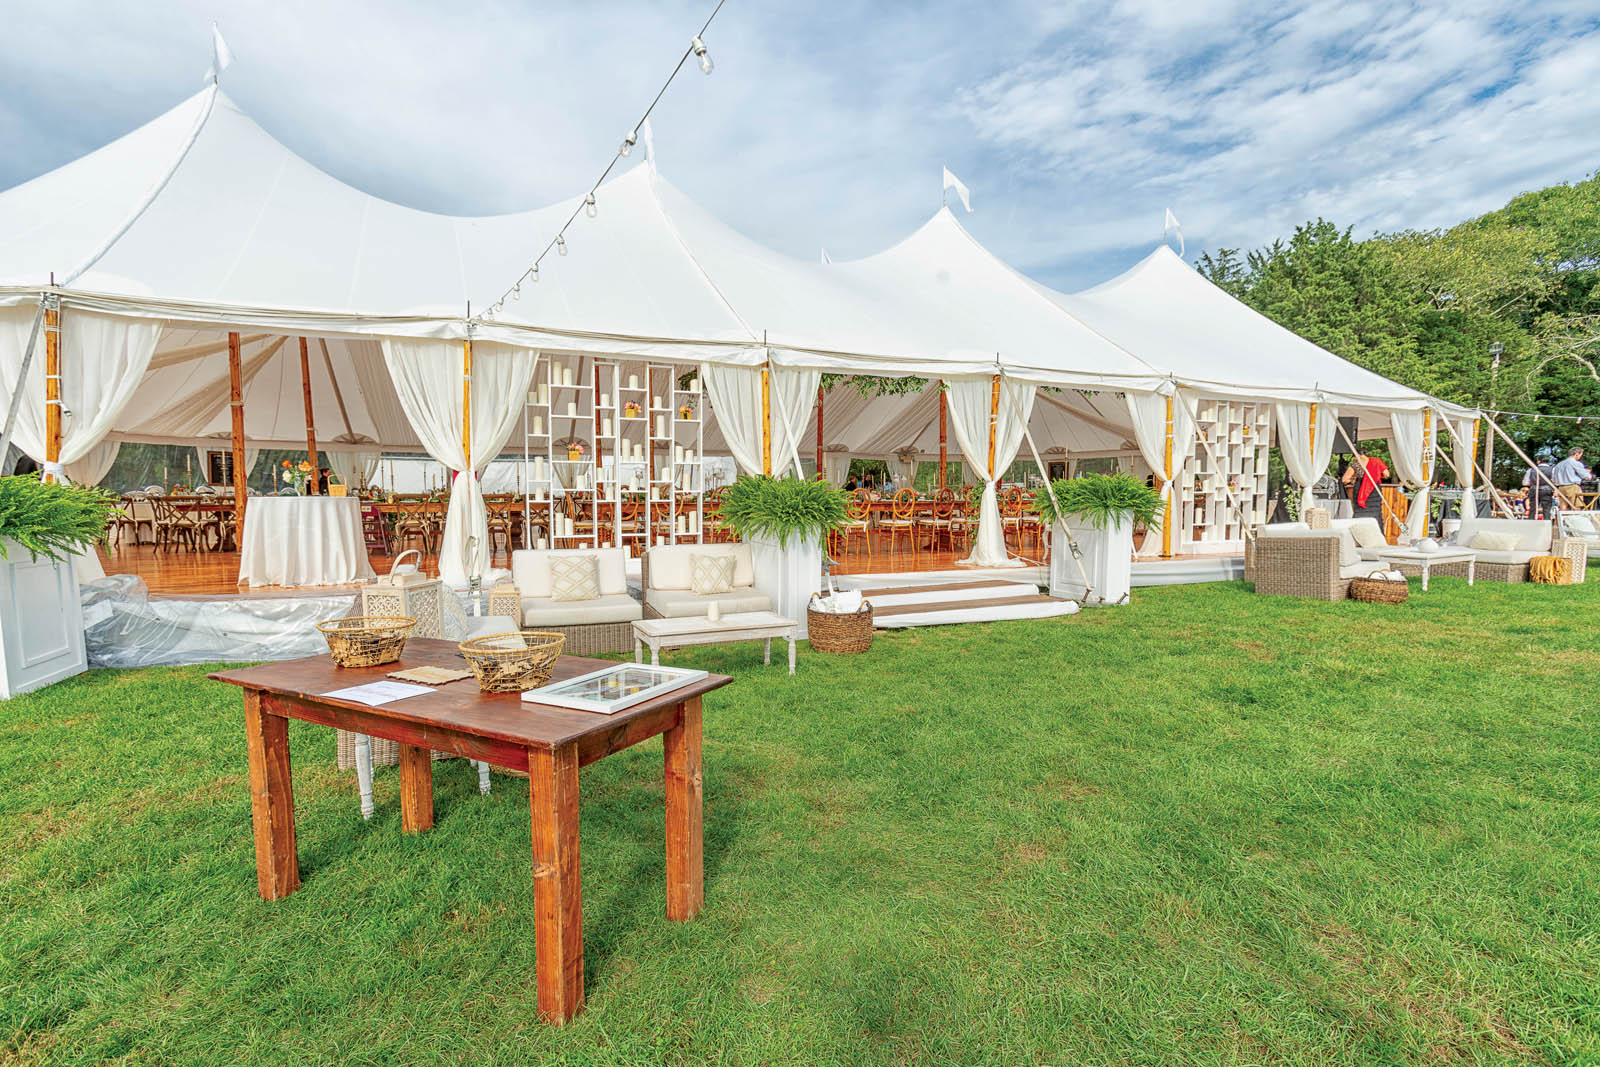 A whimsical wedding under a sailcloth tent - InTents